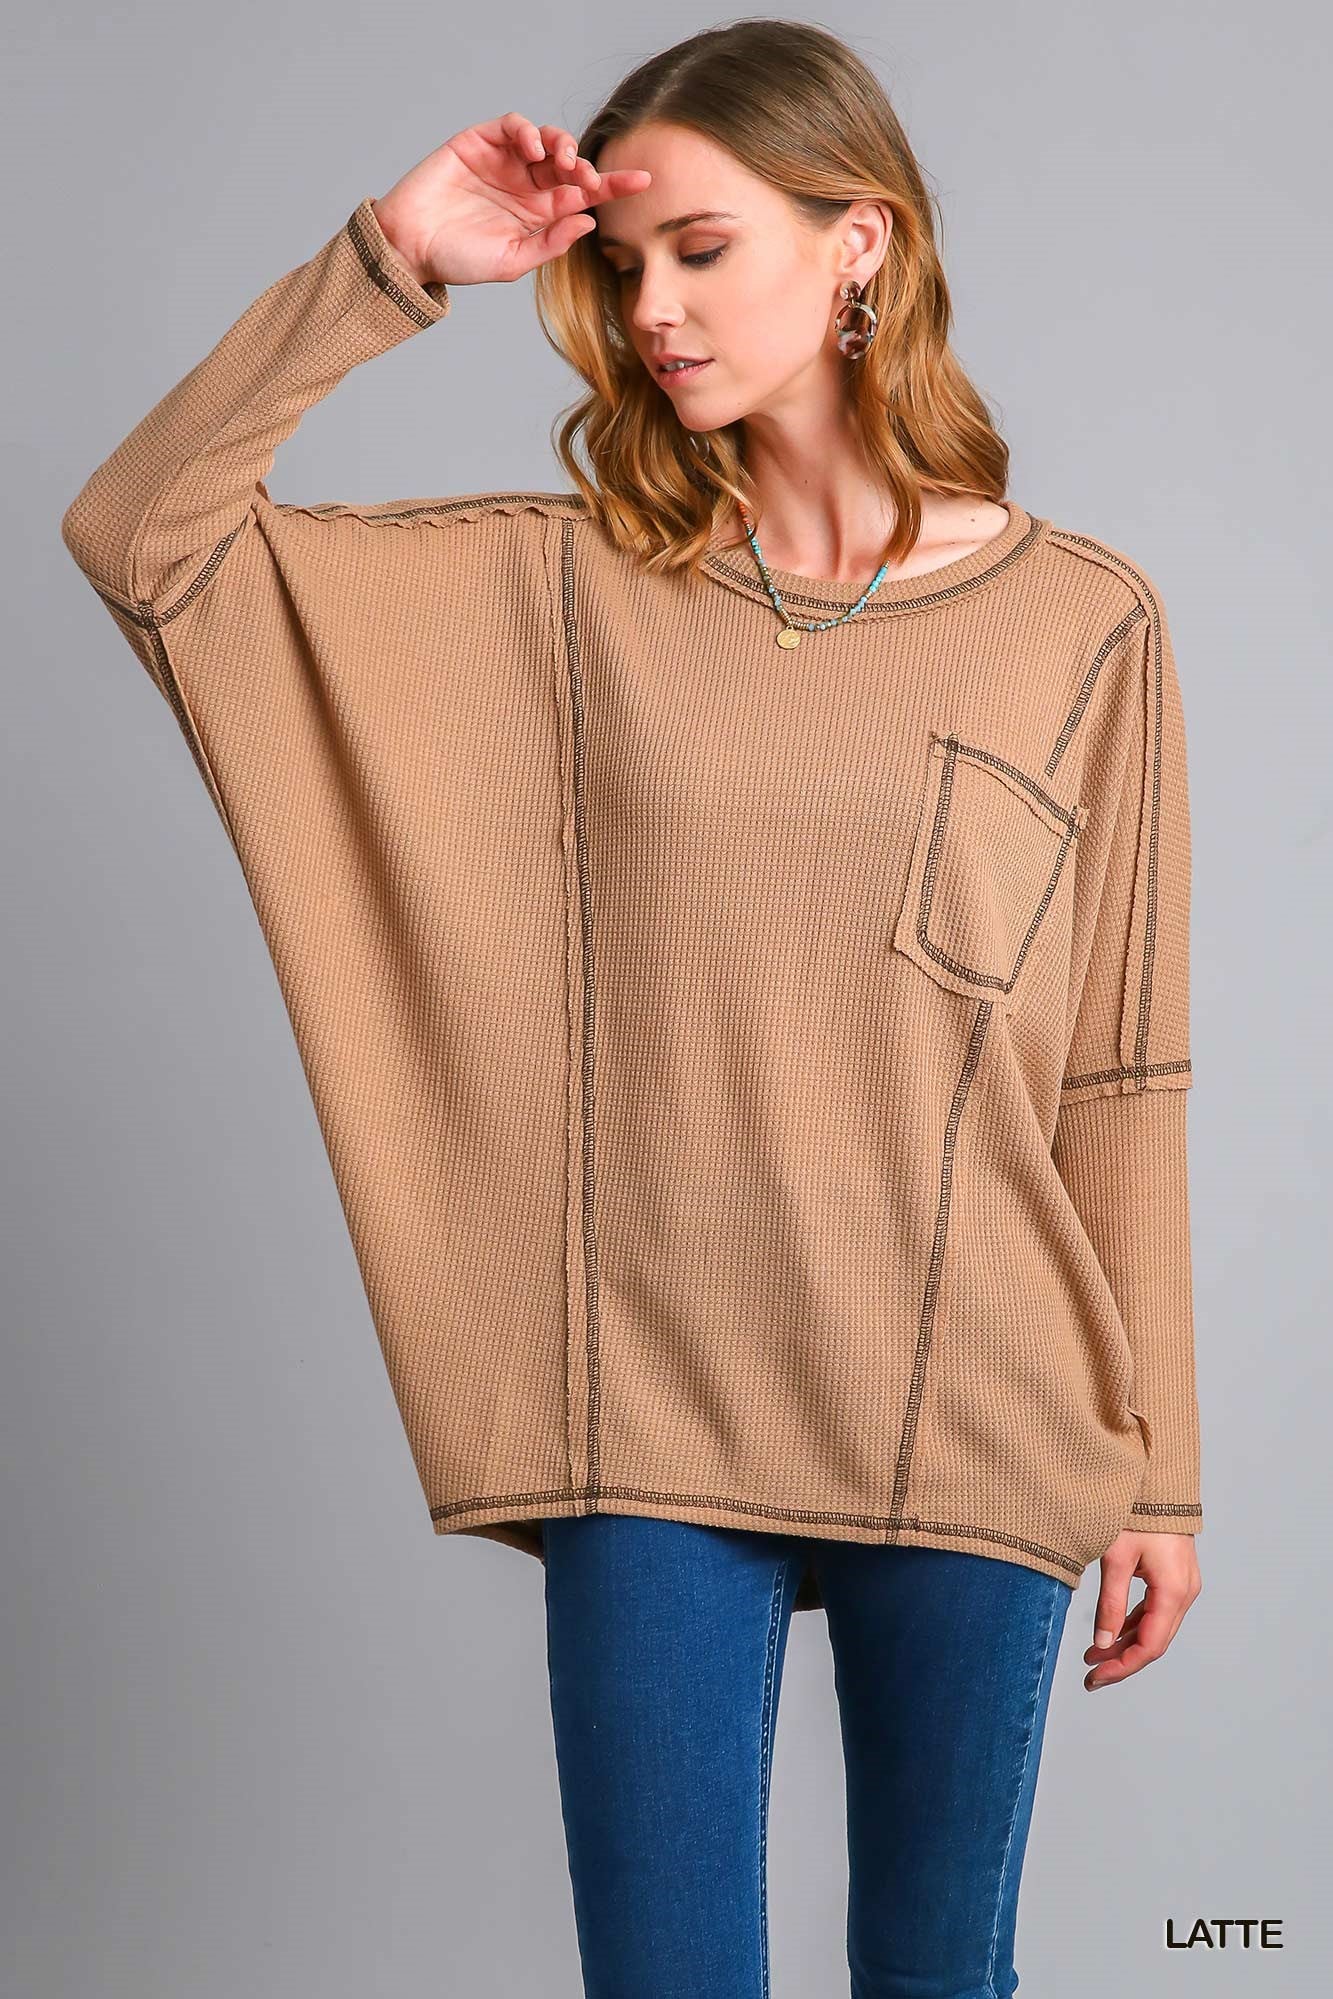 Umgee Waffle Knit Contrast Knit Long Sleeve Round Neck Pocket Top - Roulhac Fashion Boutique